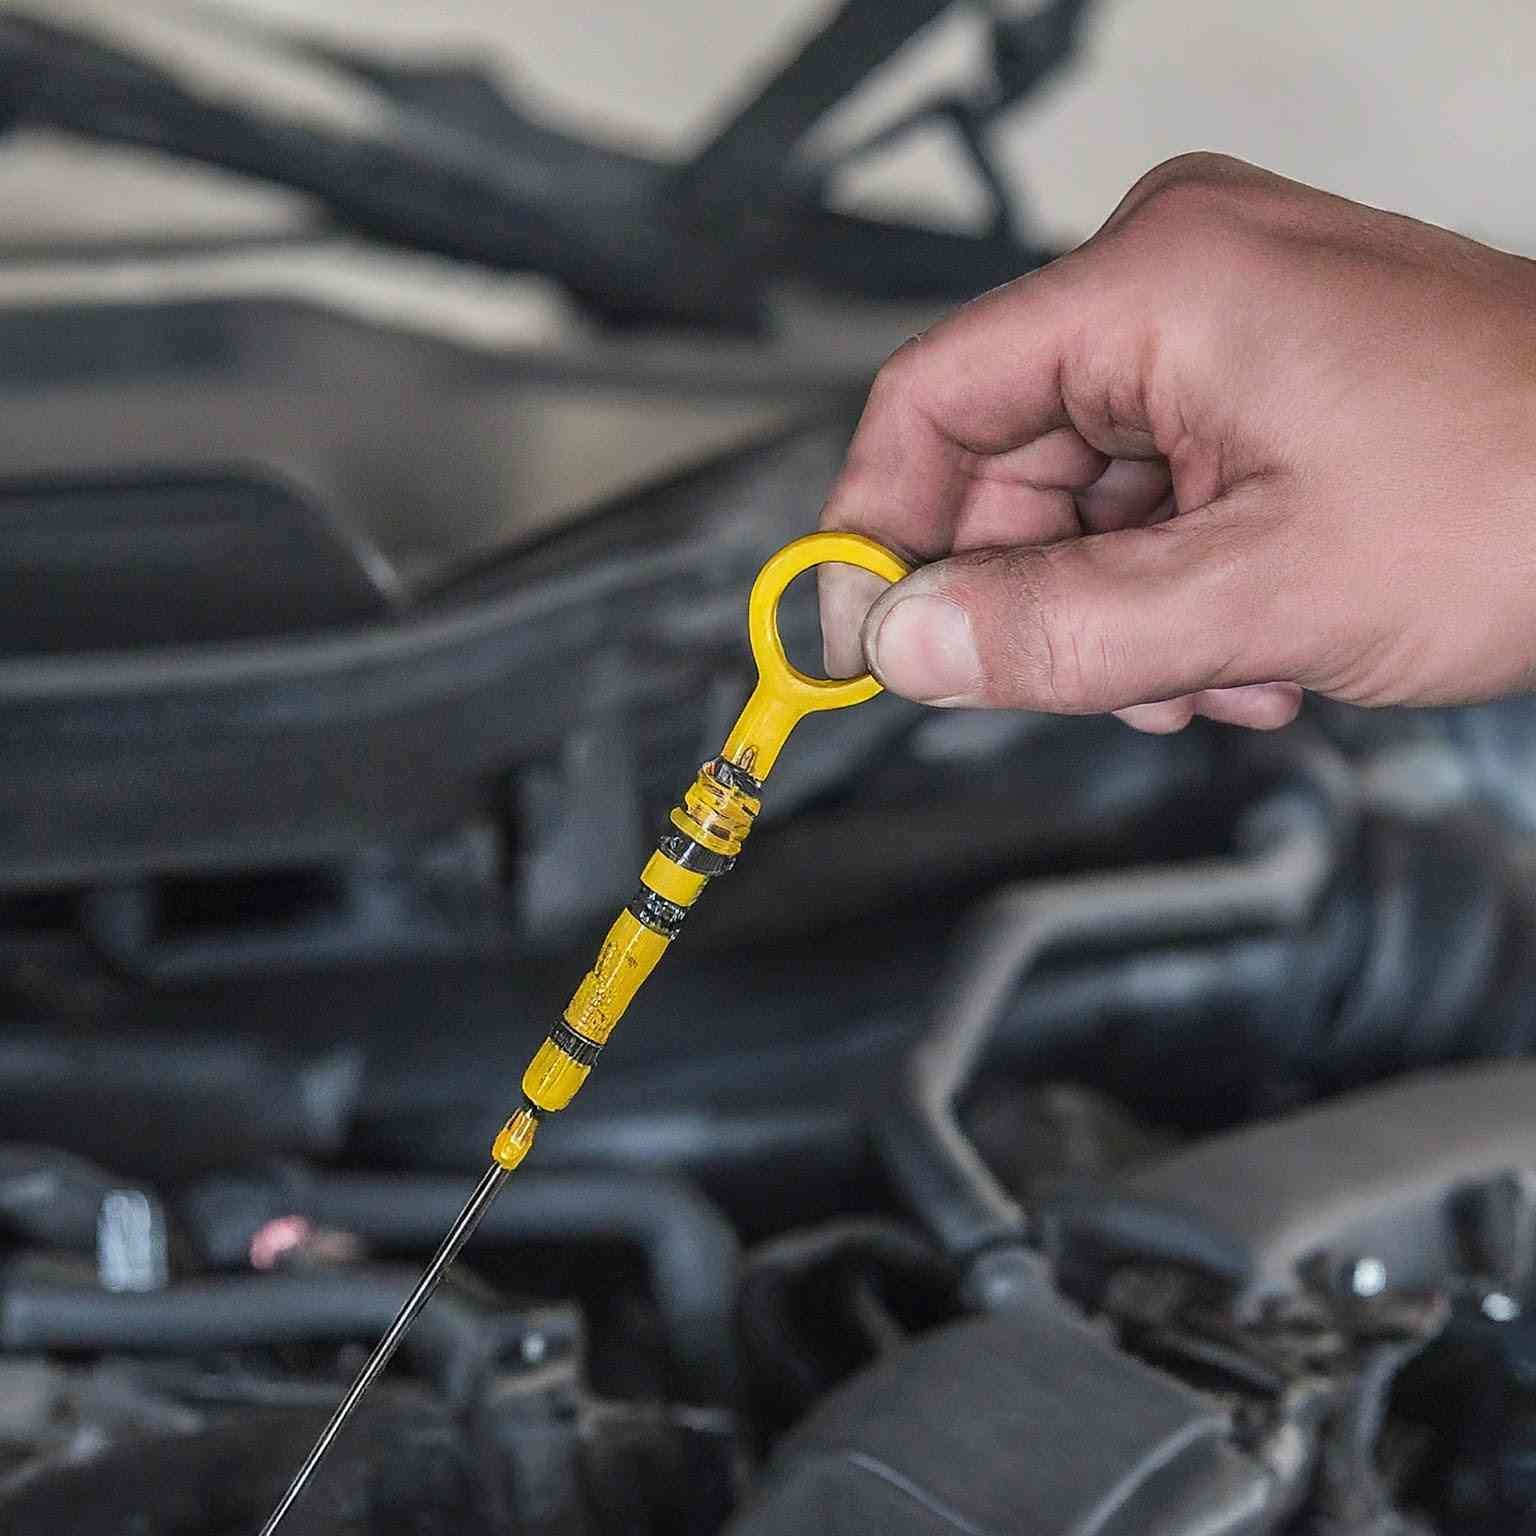 A person's hand holding a yellow dipstick, checking the oil level of a car engine. The background shows engine parts slightly blurred, emphasizing the importance of understanding your car dashboard warning lights.